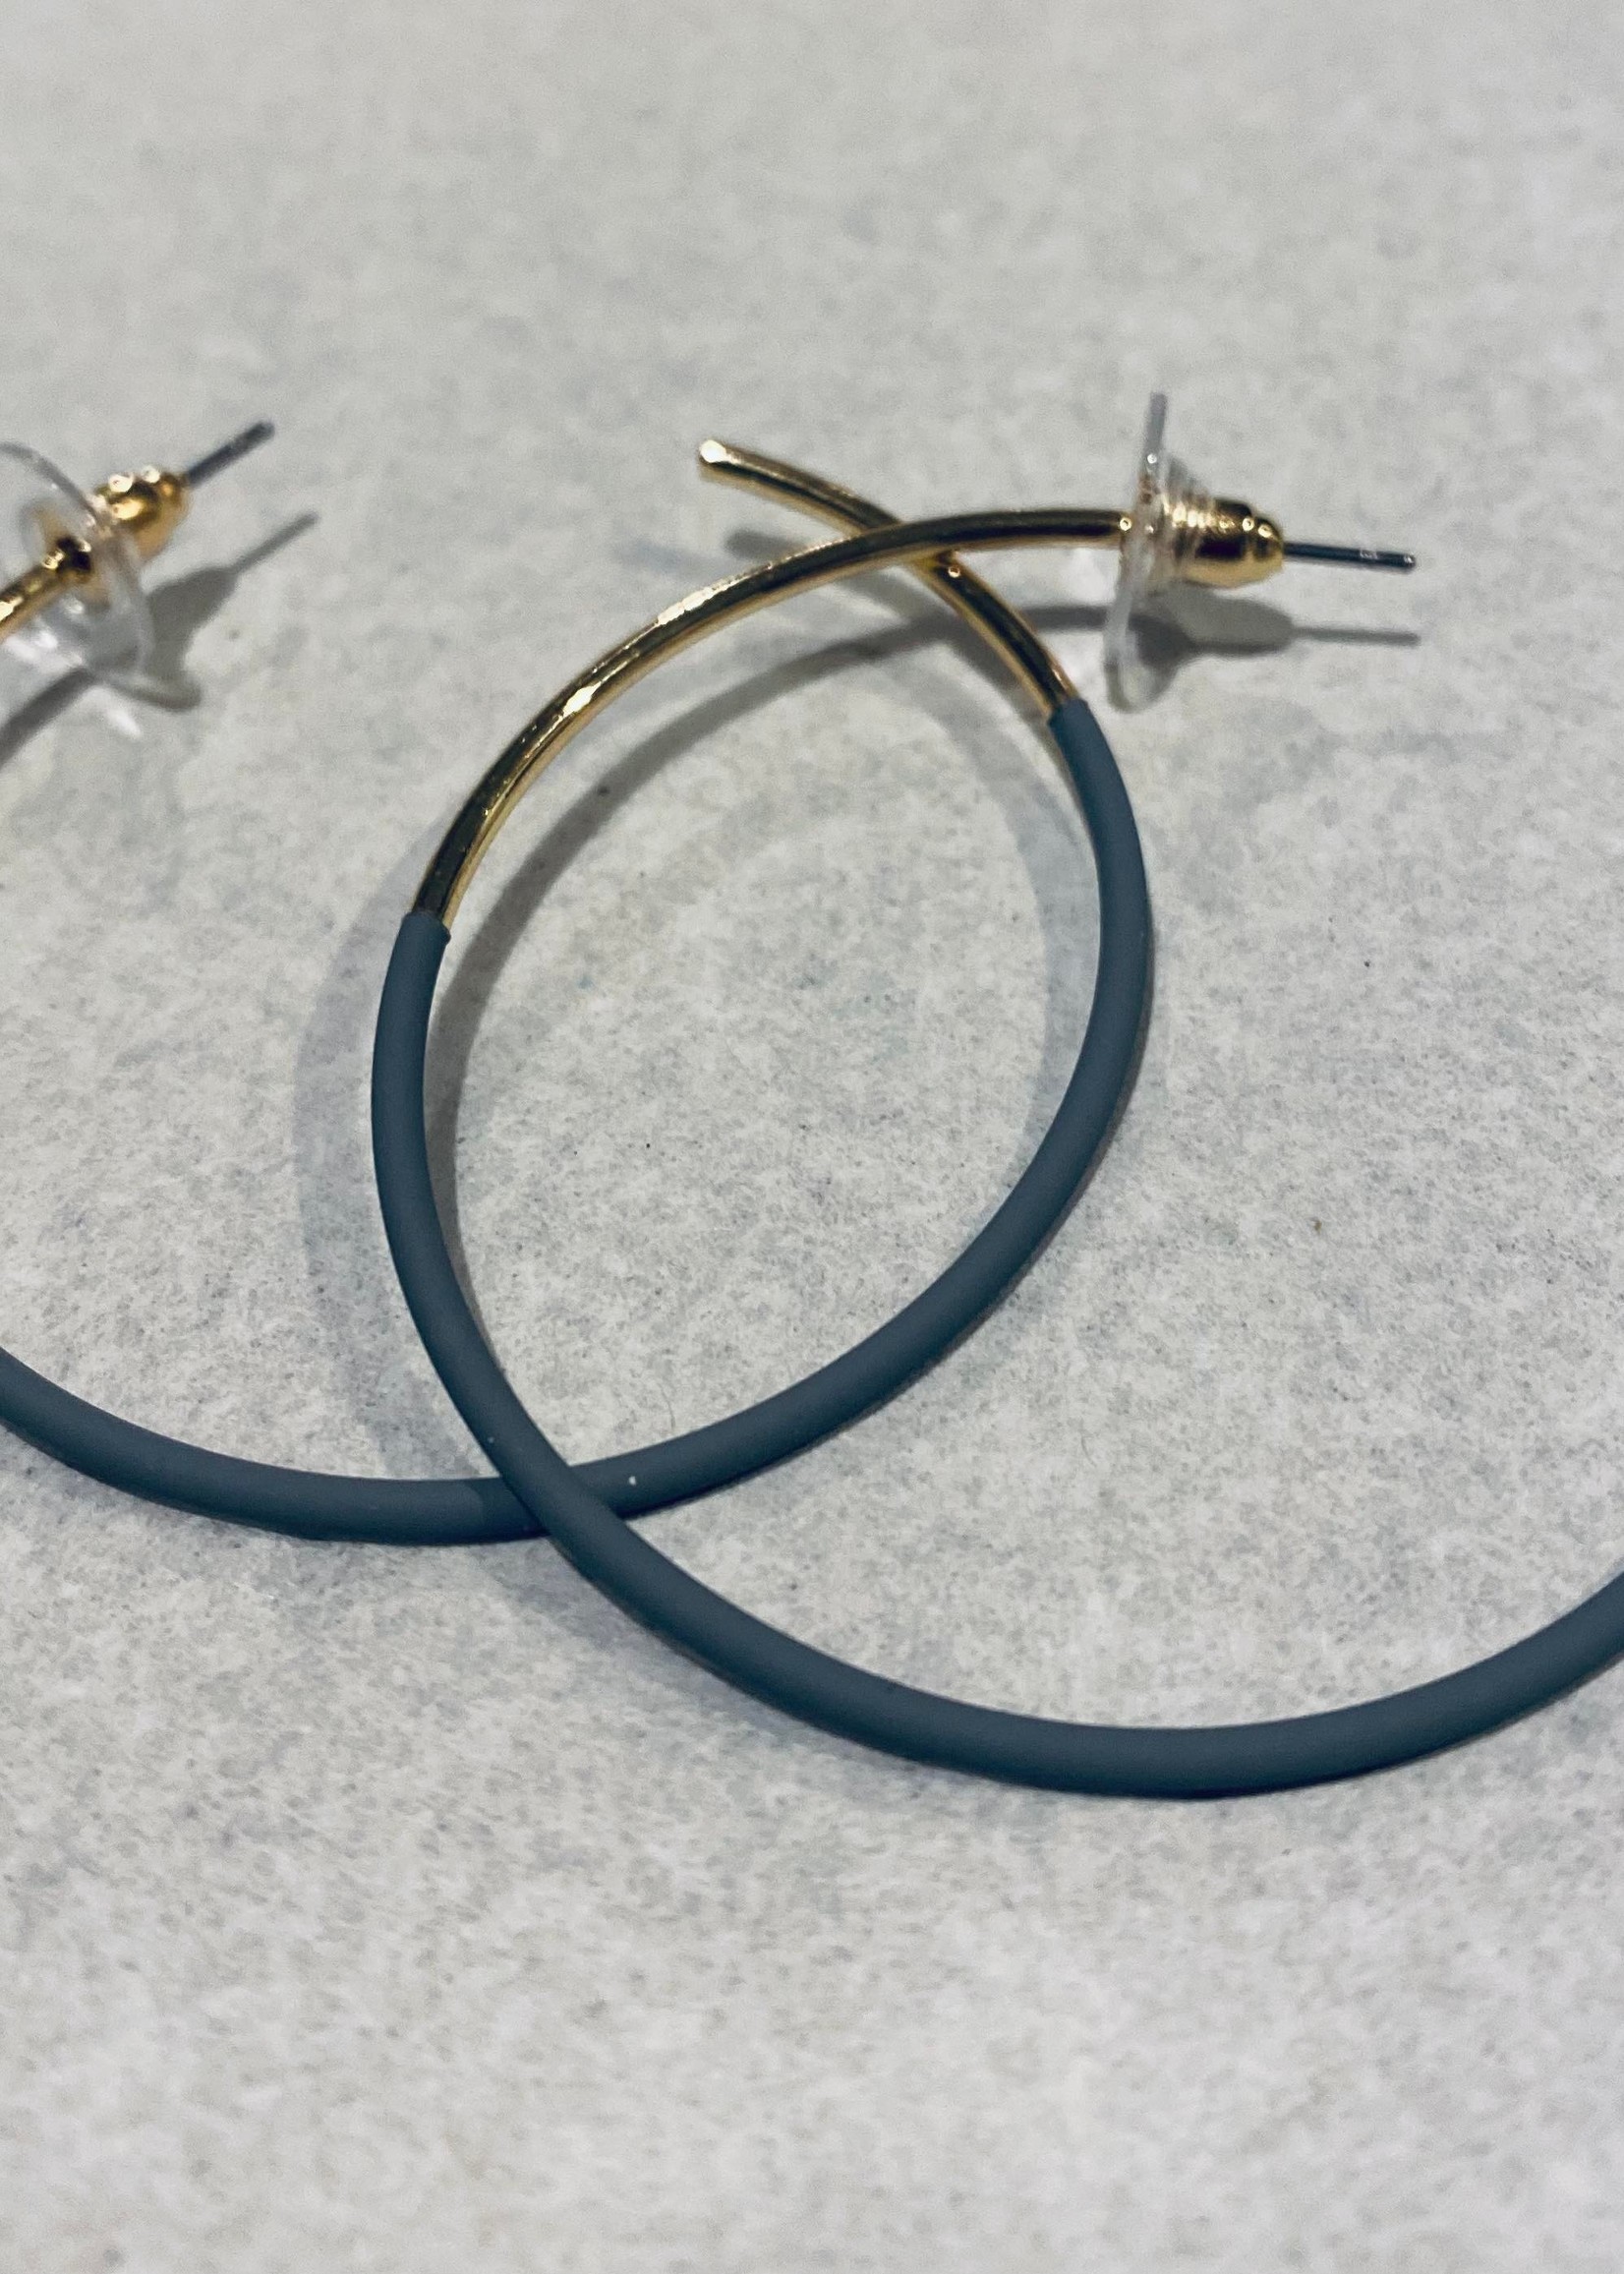 Gold and grey covered metal 2" hoop earring